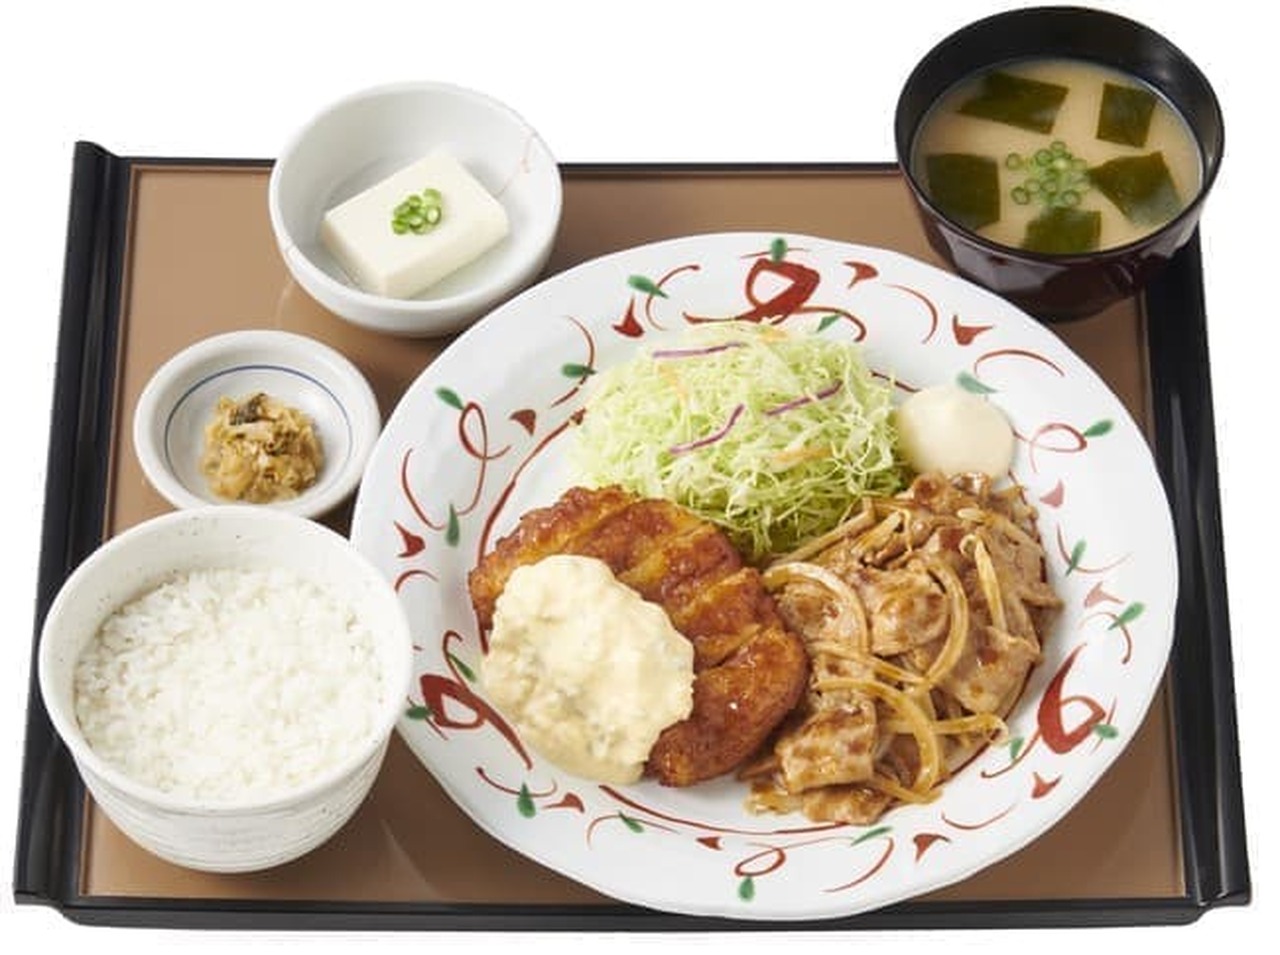 Yayoiken "Popular combination set meal of chicken nanban and ginger grilled"